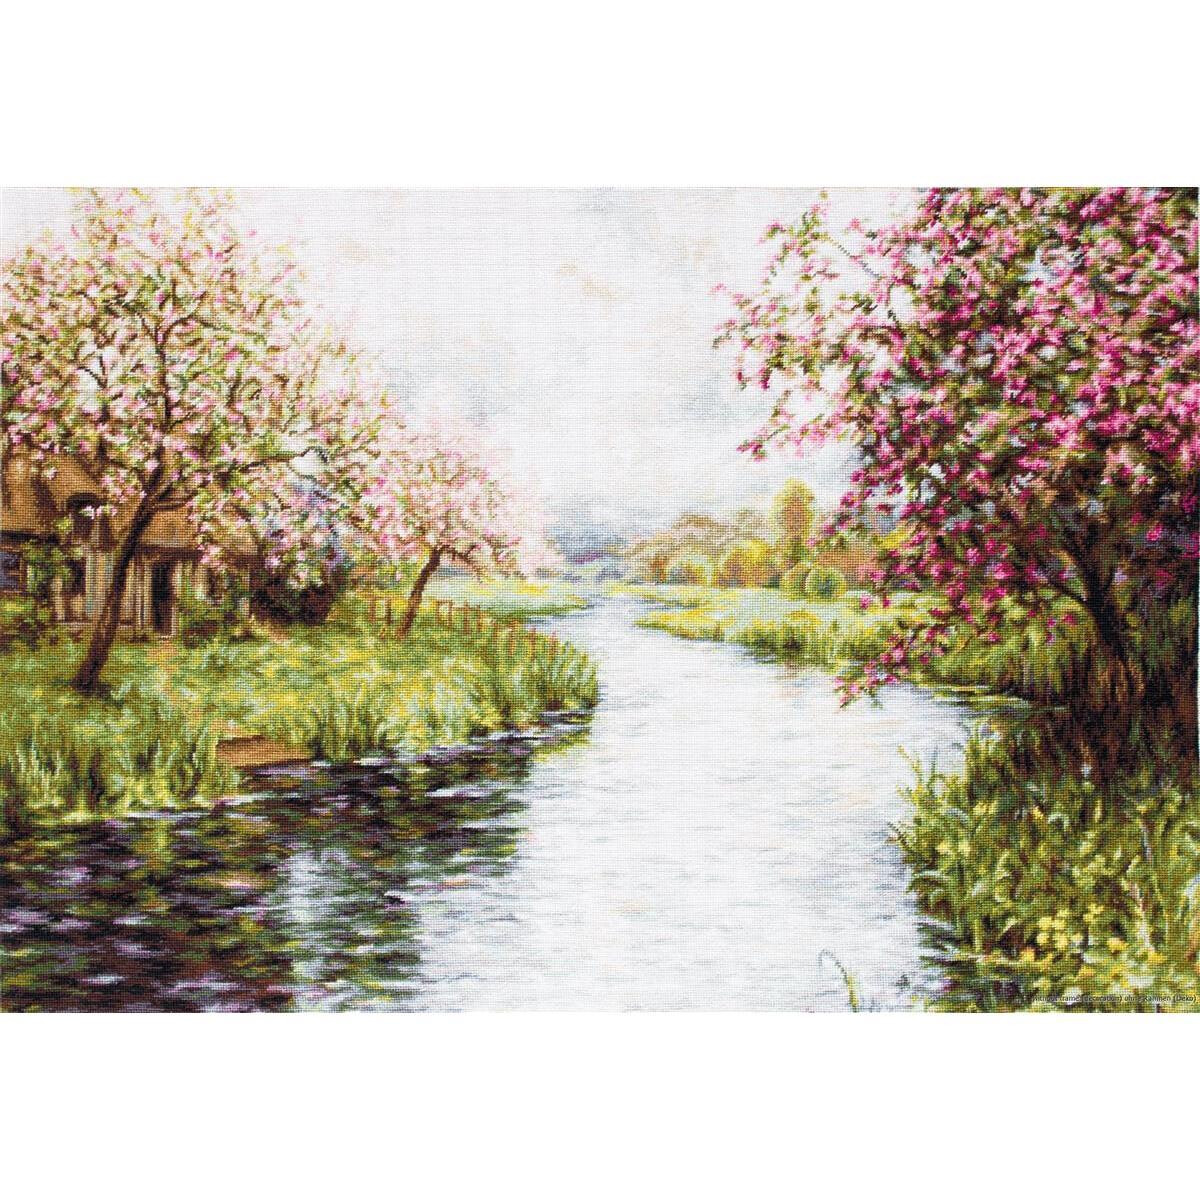 A tranquil landscape painting of a river flowing through...